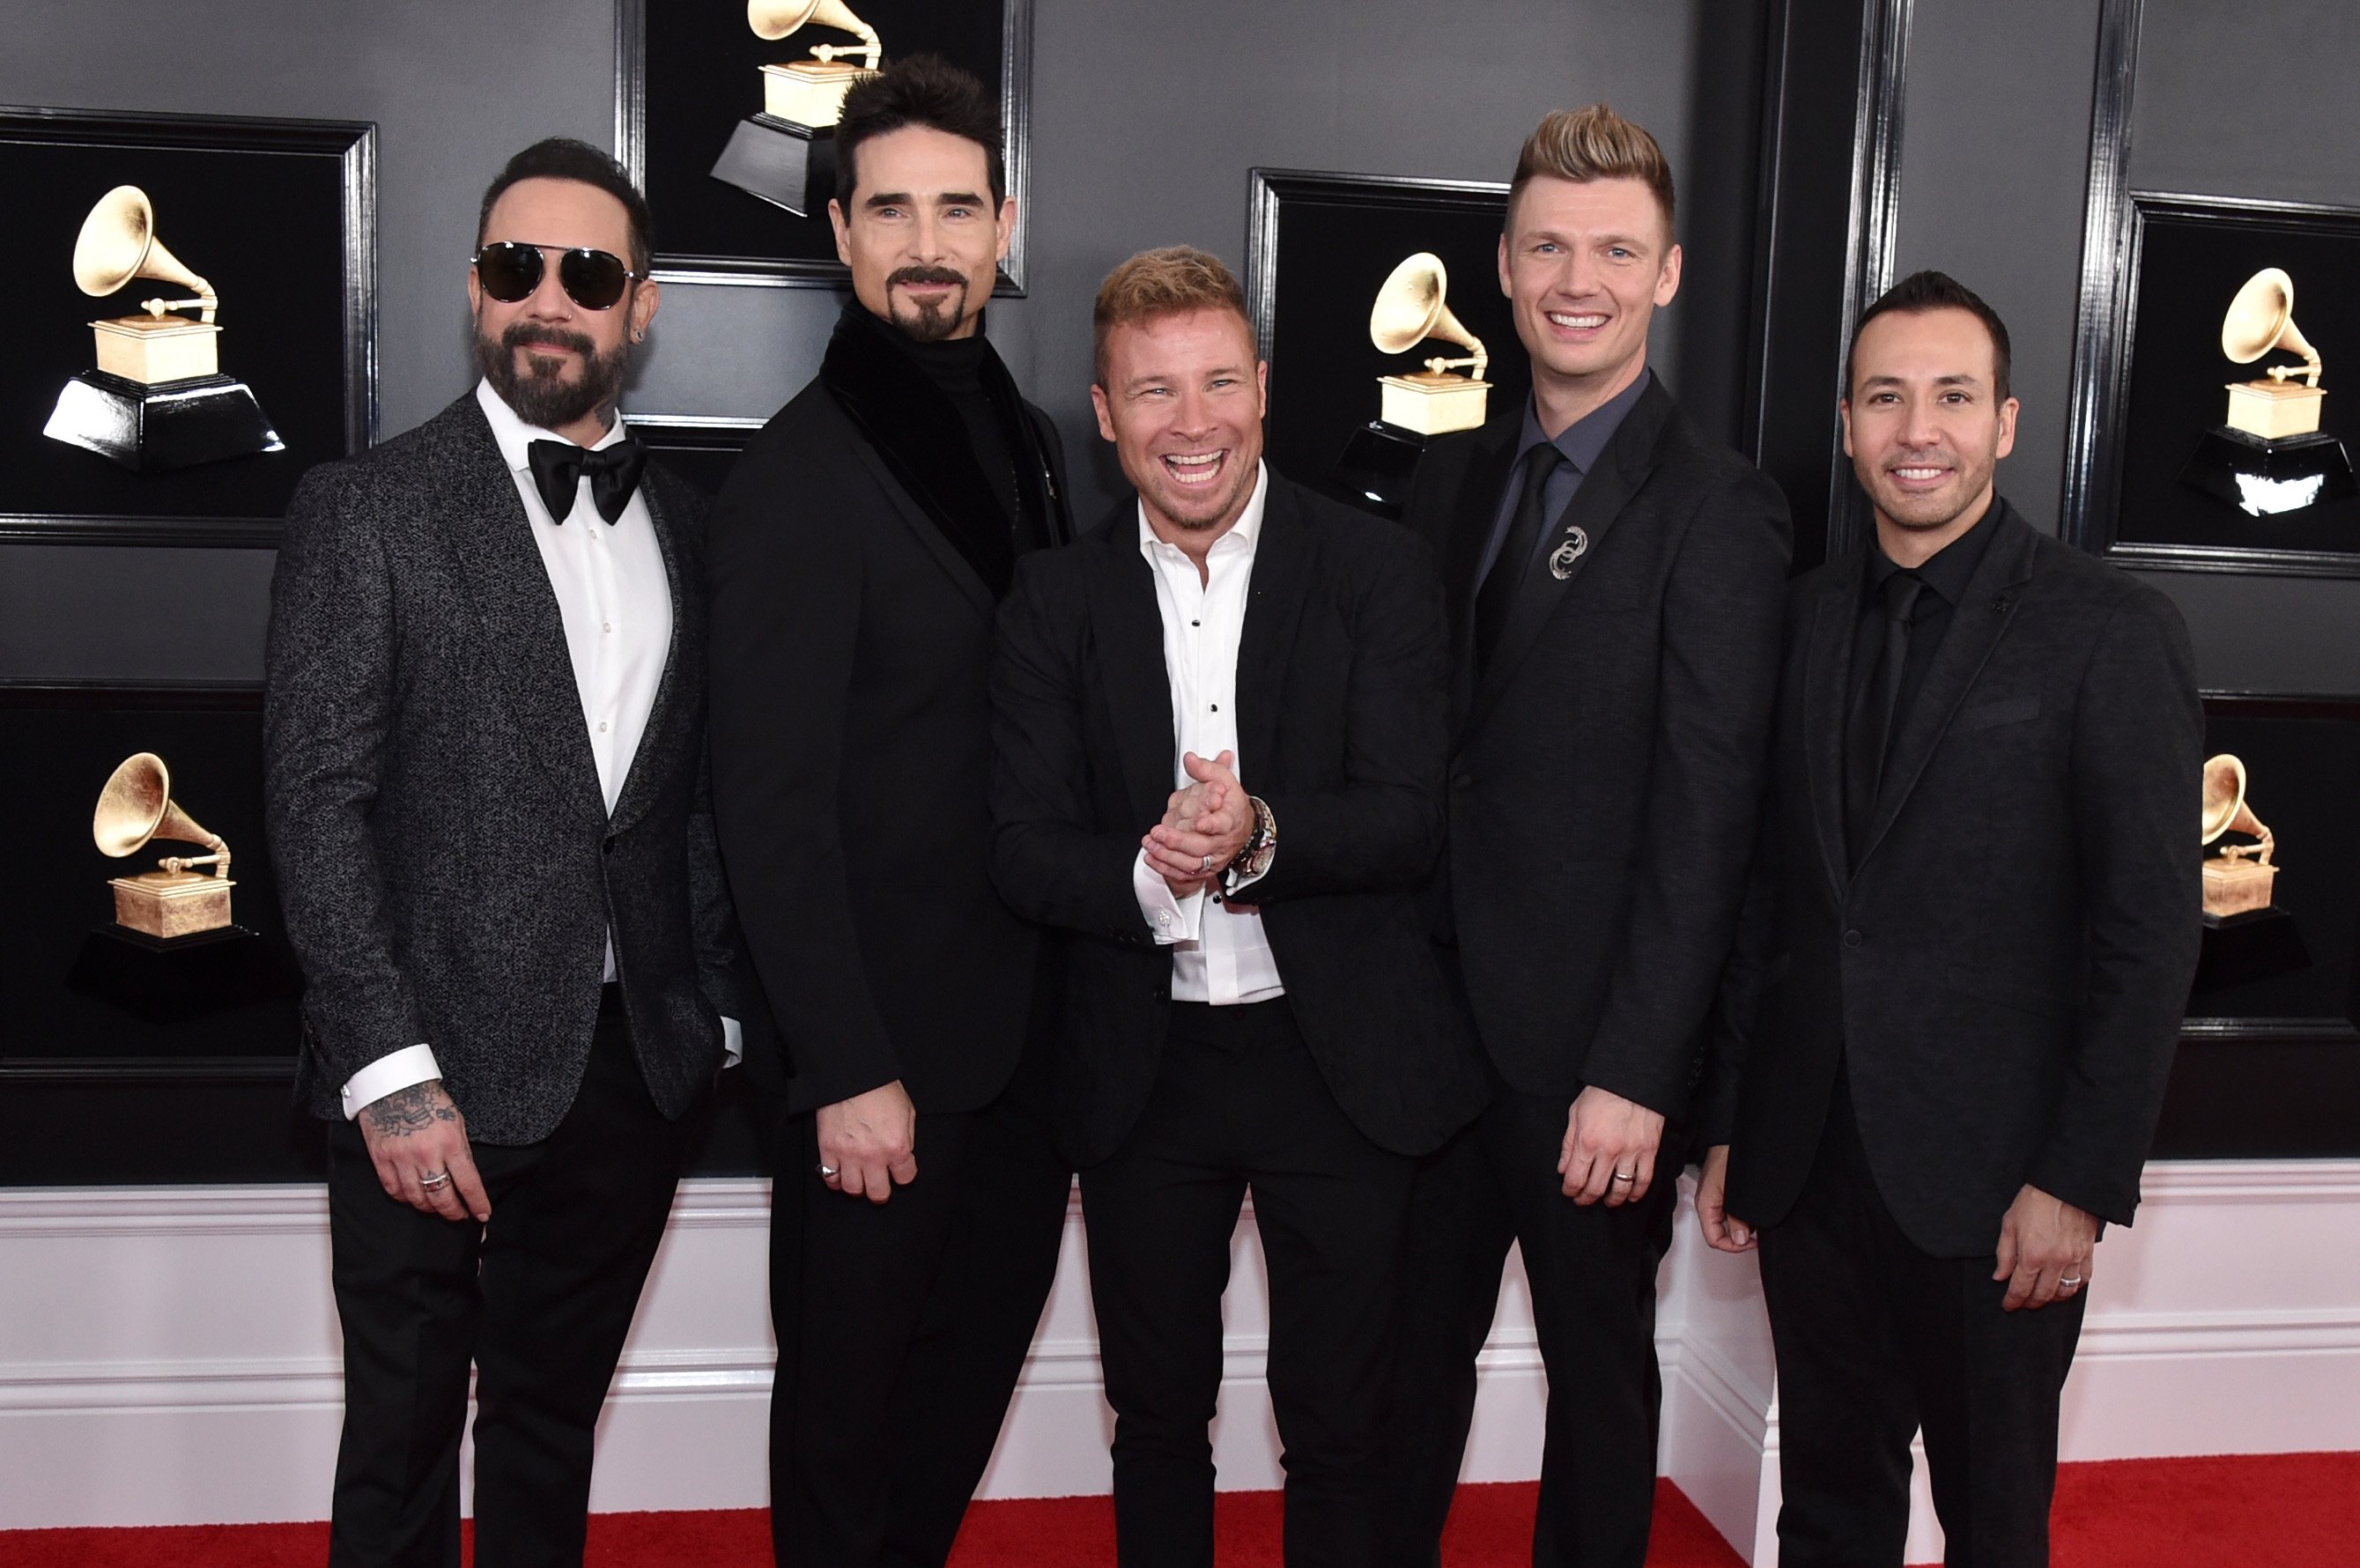 The Backstreet Boys wear dark suits while attending the Grammy Awards in 2019